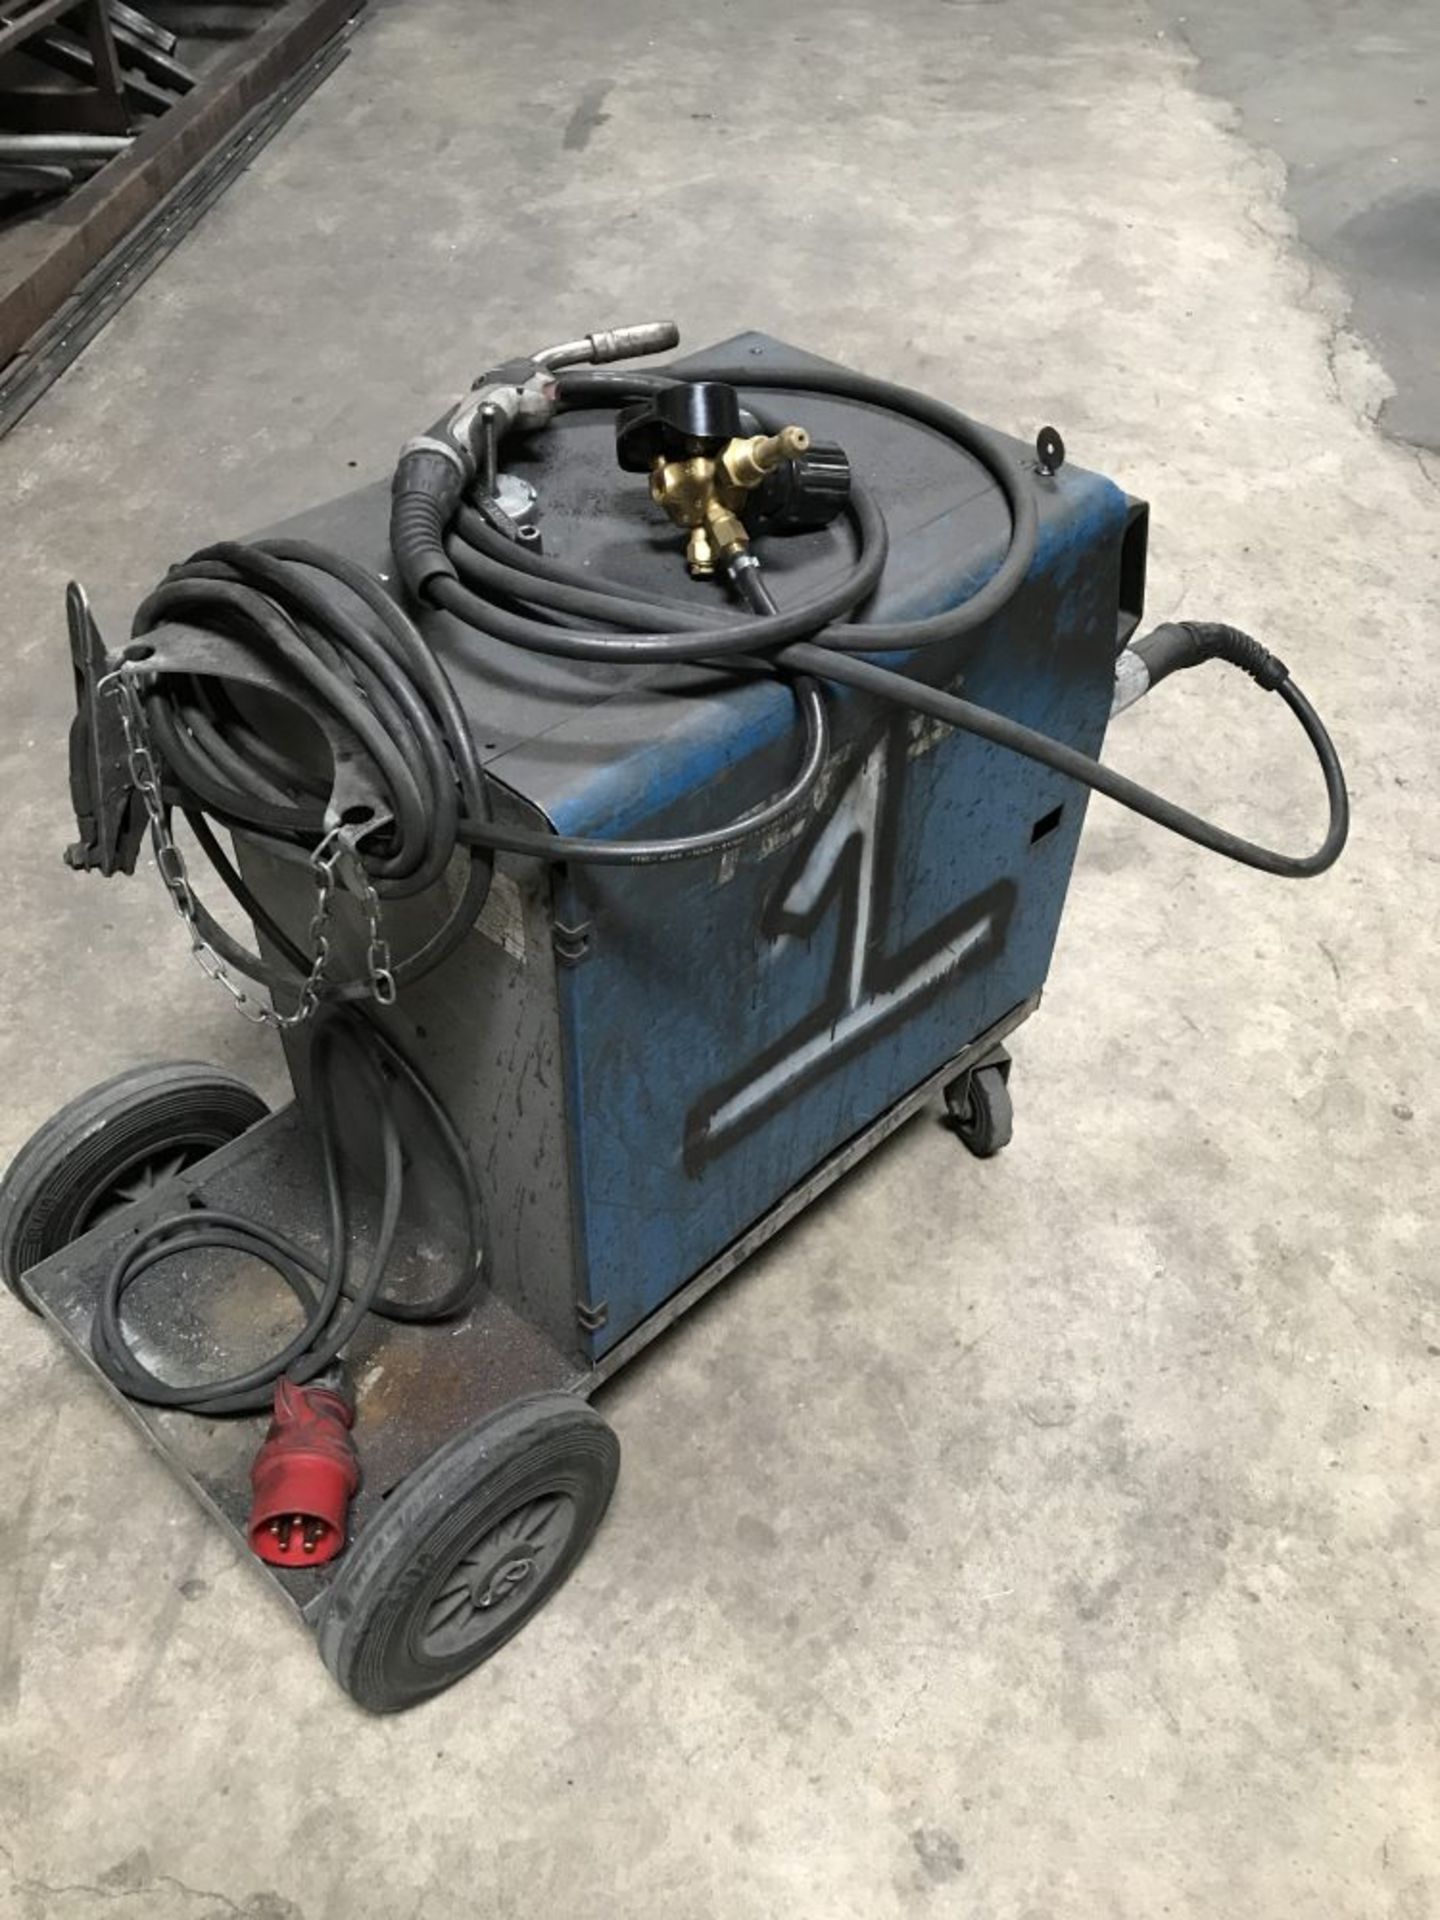 TecArc welding set with regulator, torch, hose and trolley - Image 6 of 6